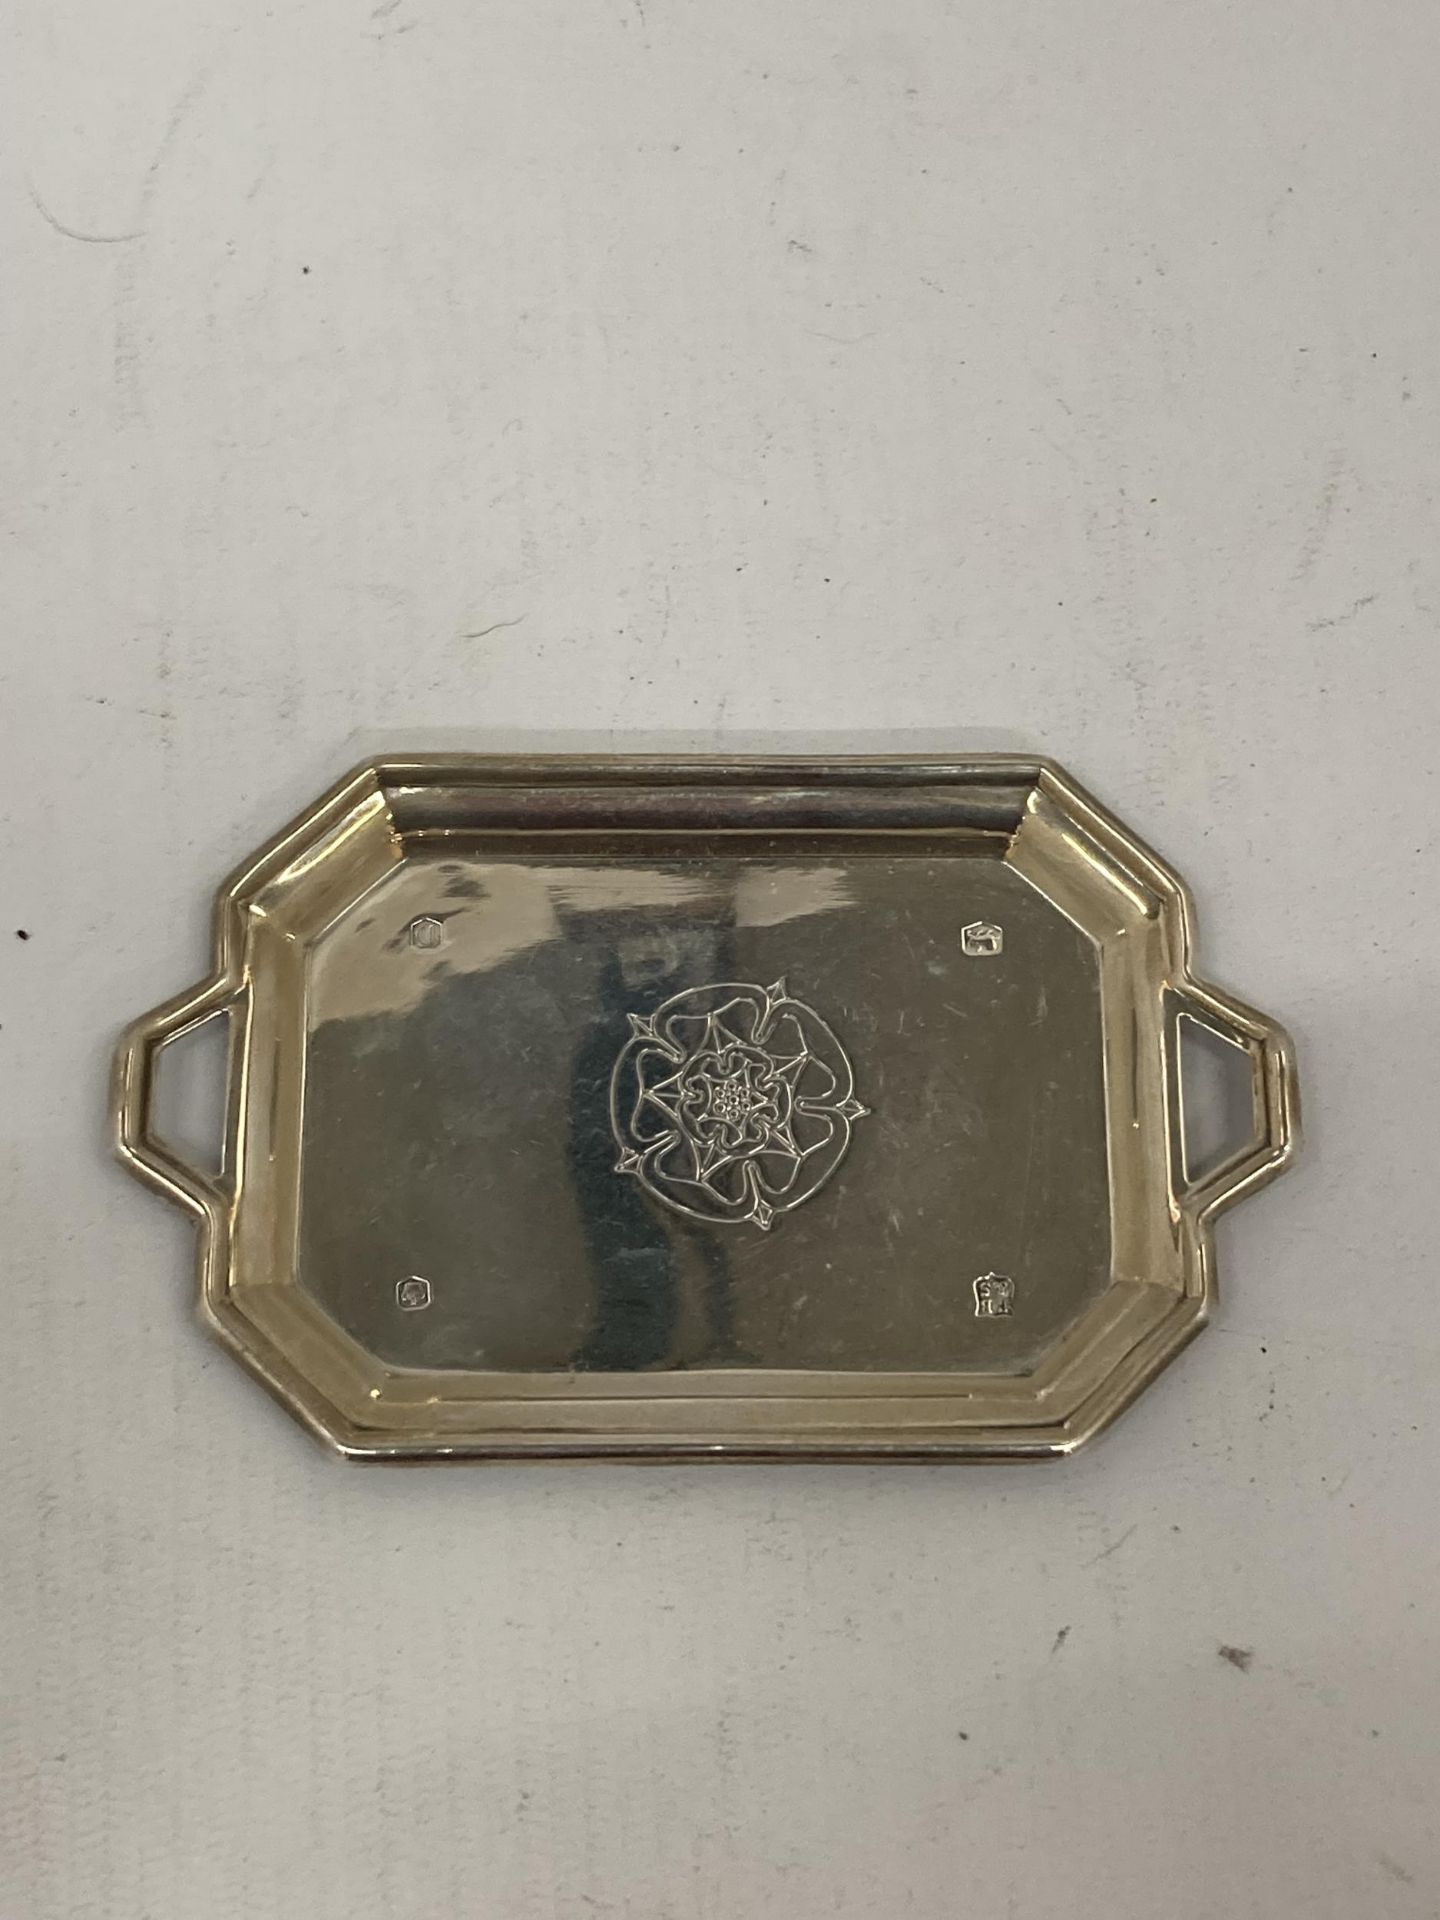 A SHEFFIELD HALLMARKED SILVER SMALL TRAY WITH ROSE DESIGN, LENGTH 12.5CM, WEIGHT 49G